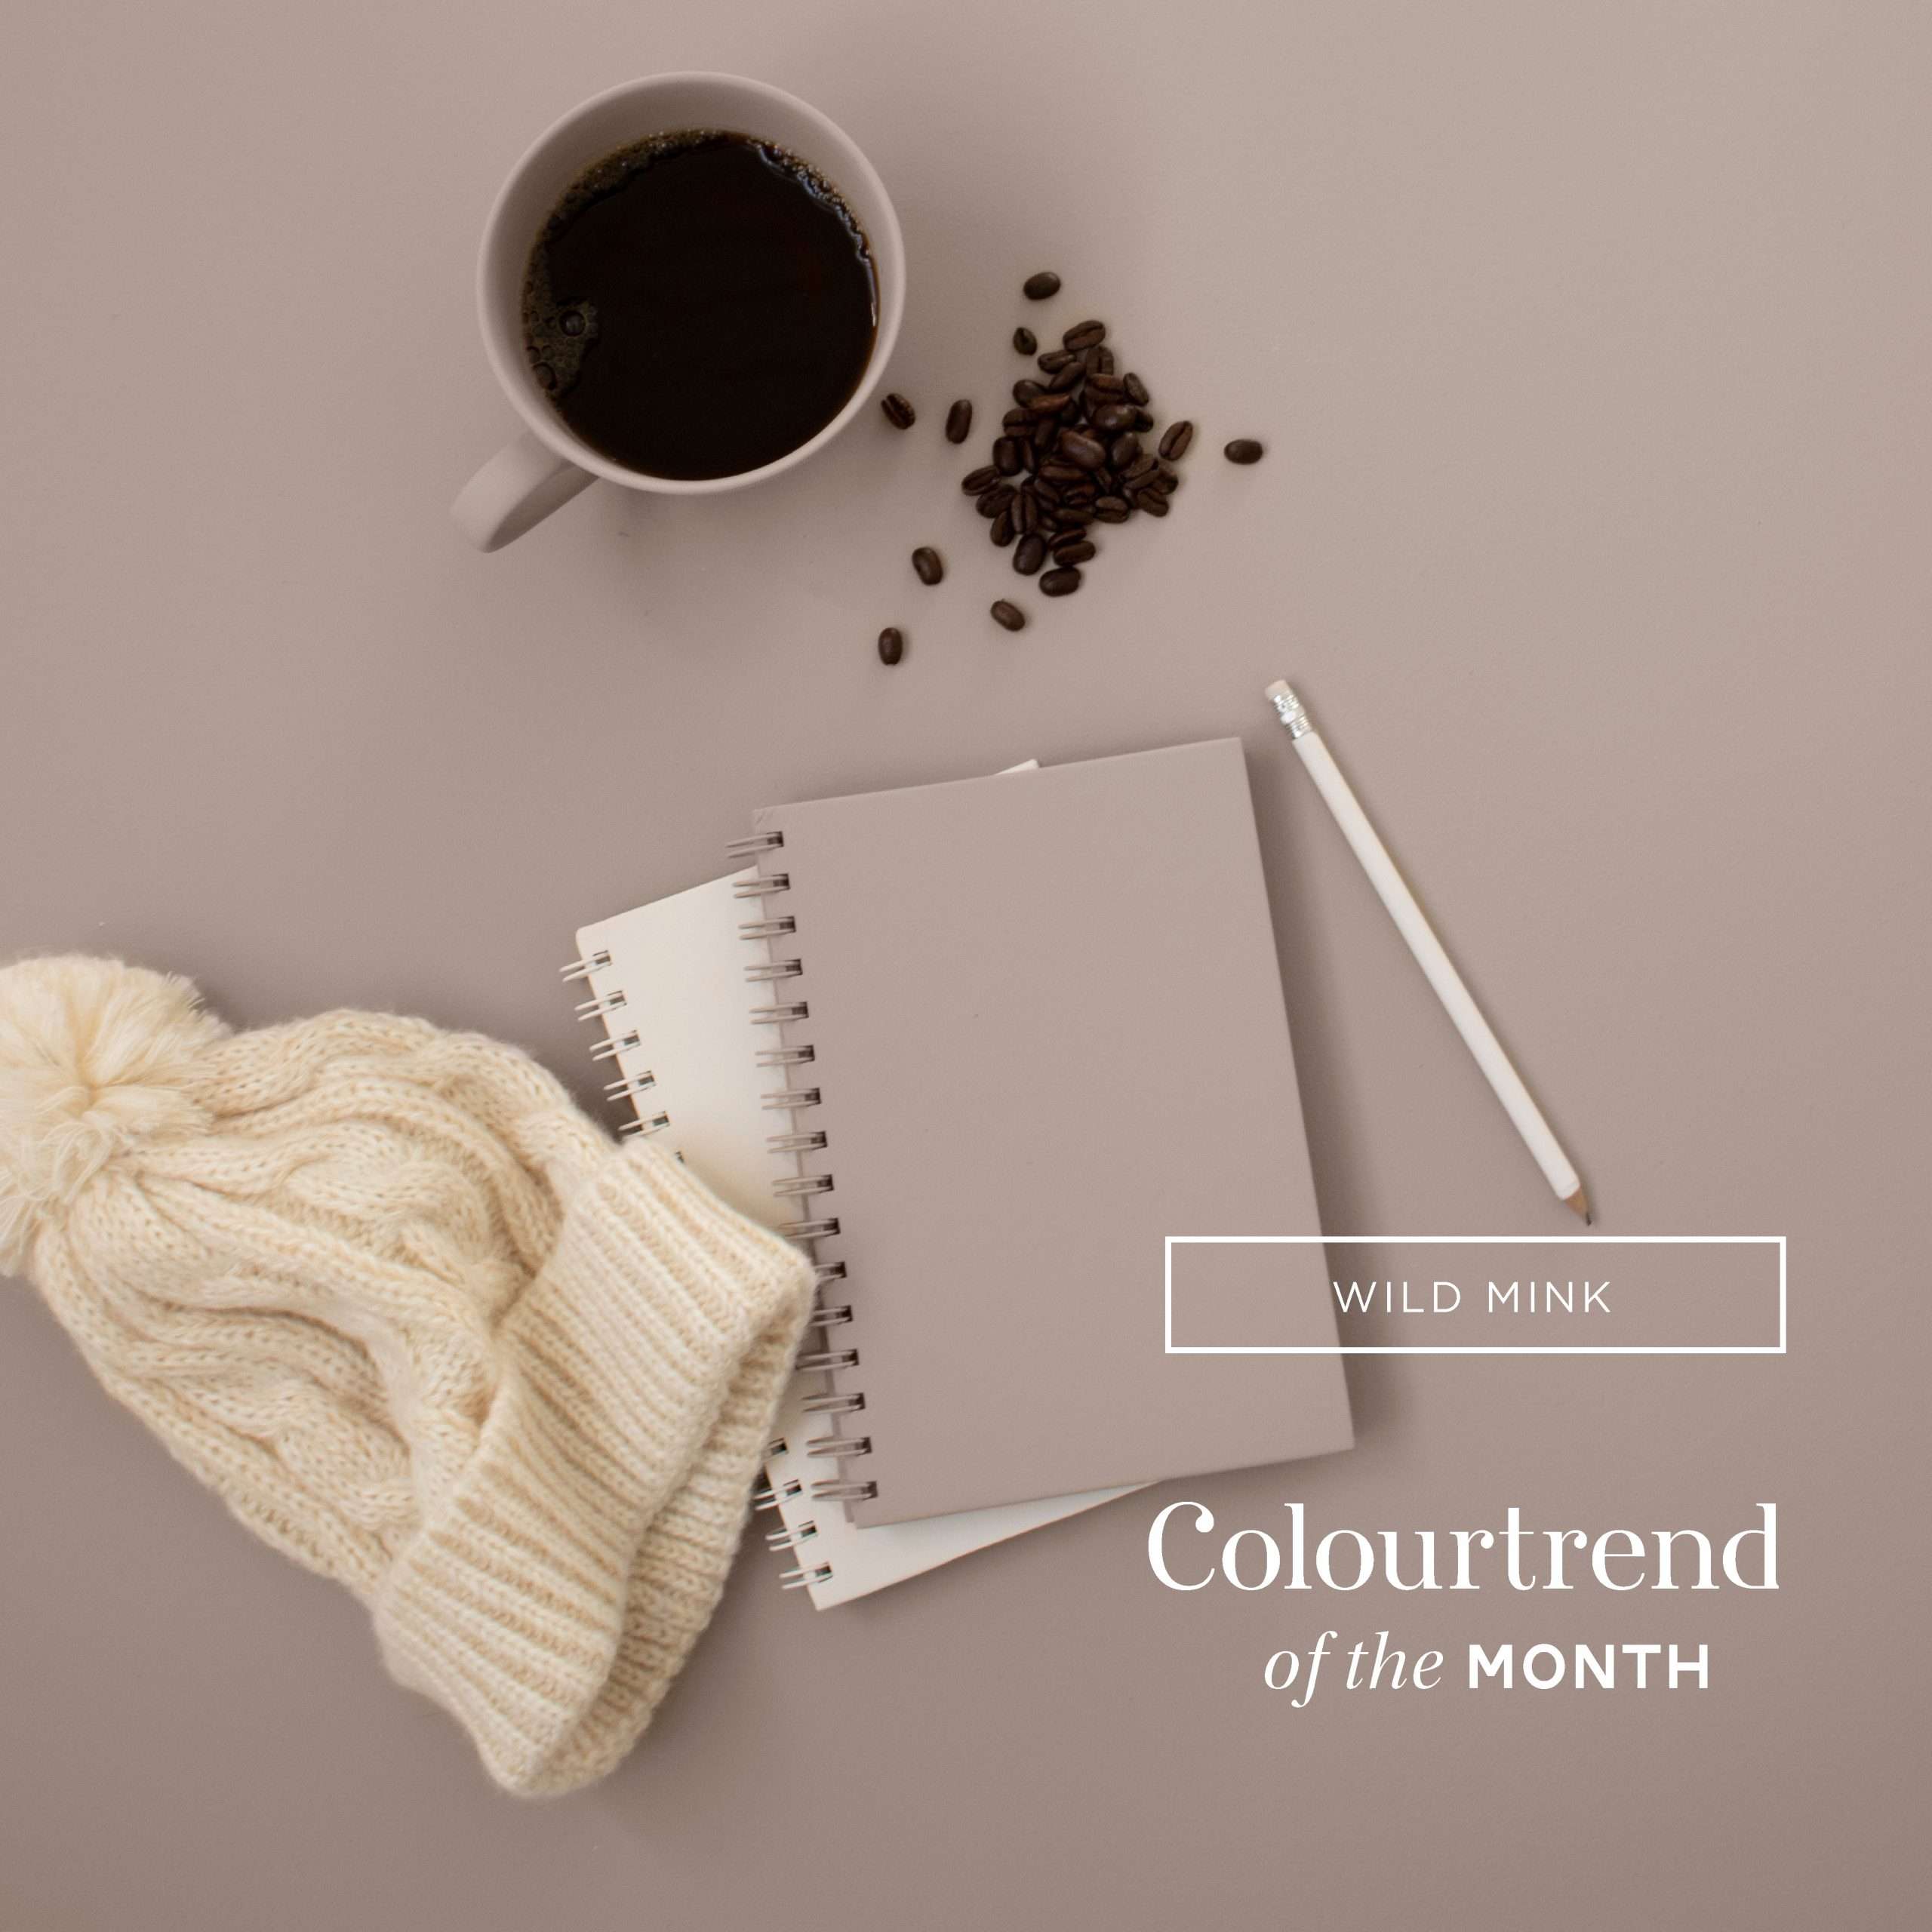 Colourtrend Wild Mink | Same Day Dublin and Nationwide Paint in Ireland Delivery by Weirs of Baggot Street - Official Colourtrend Stockist